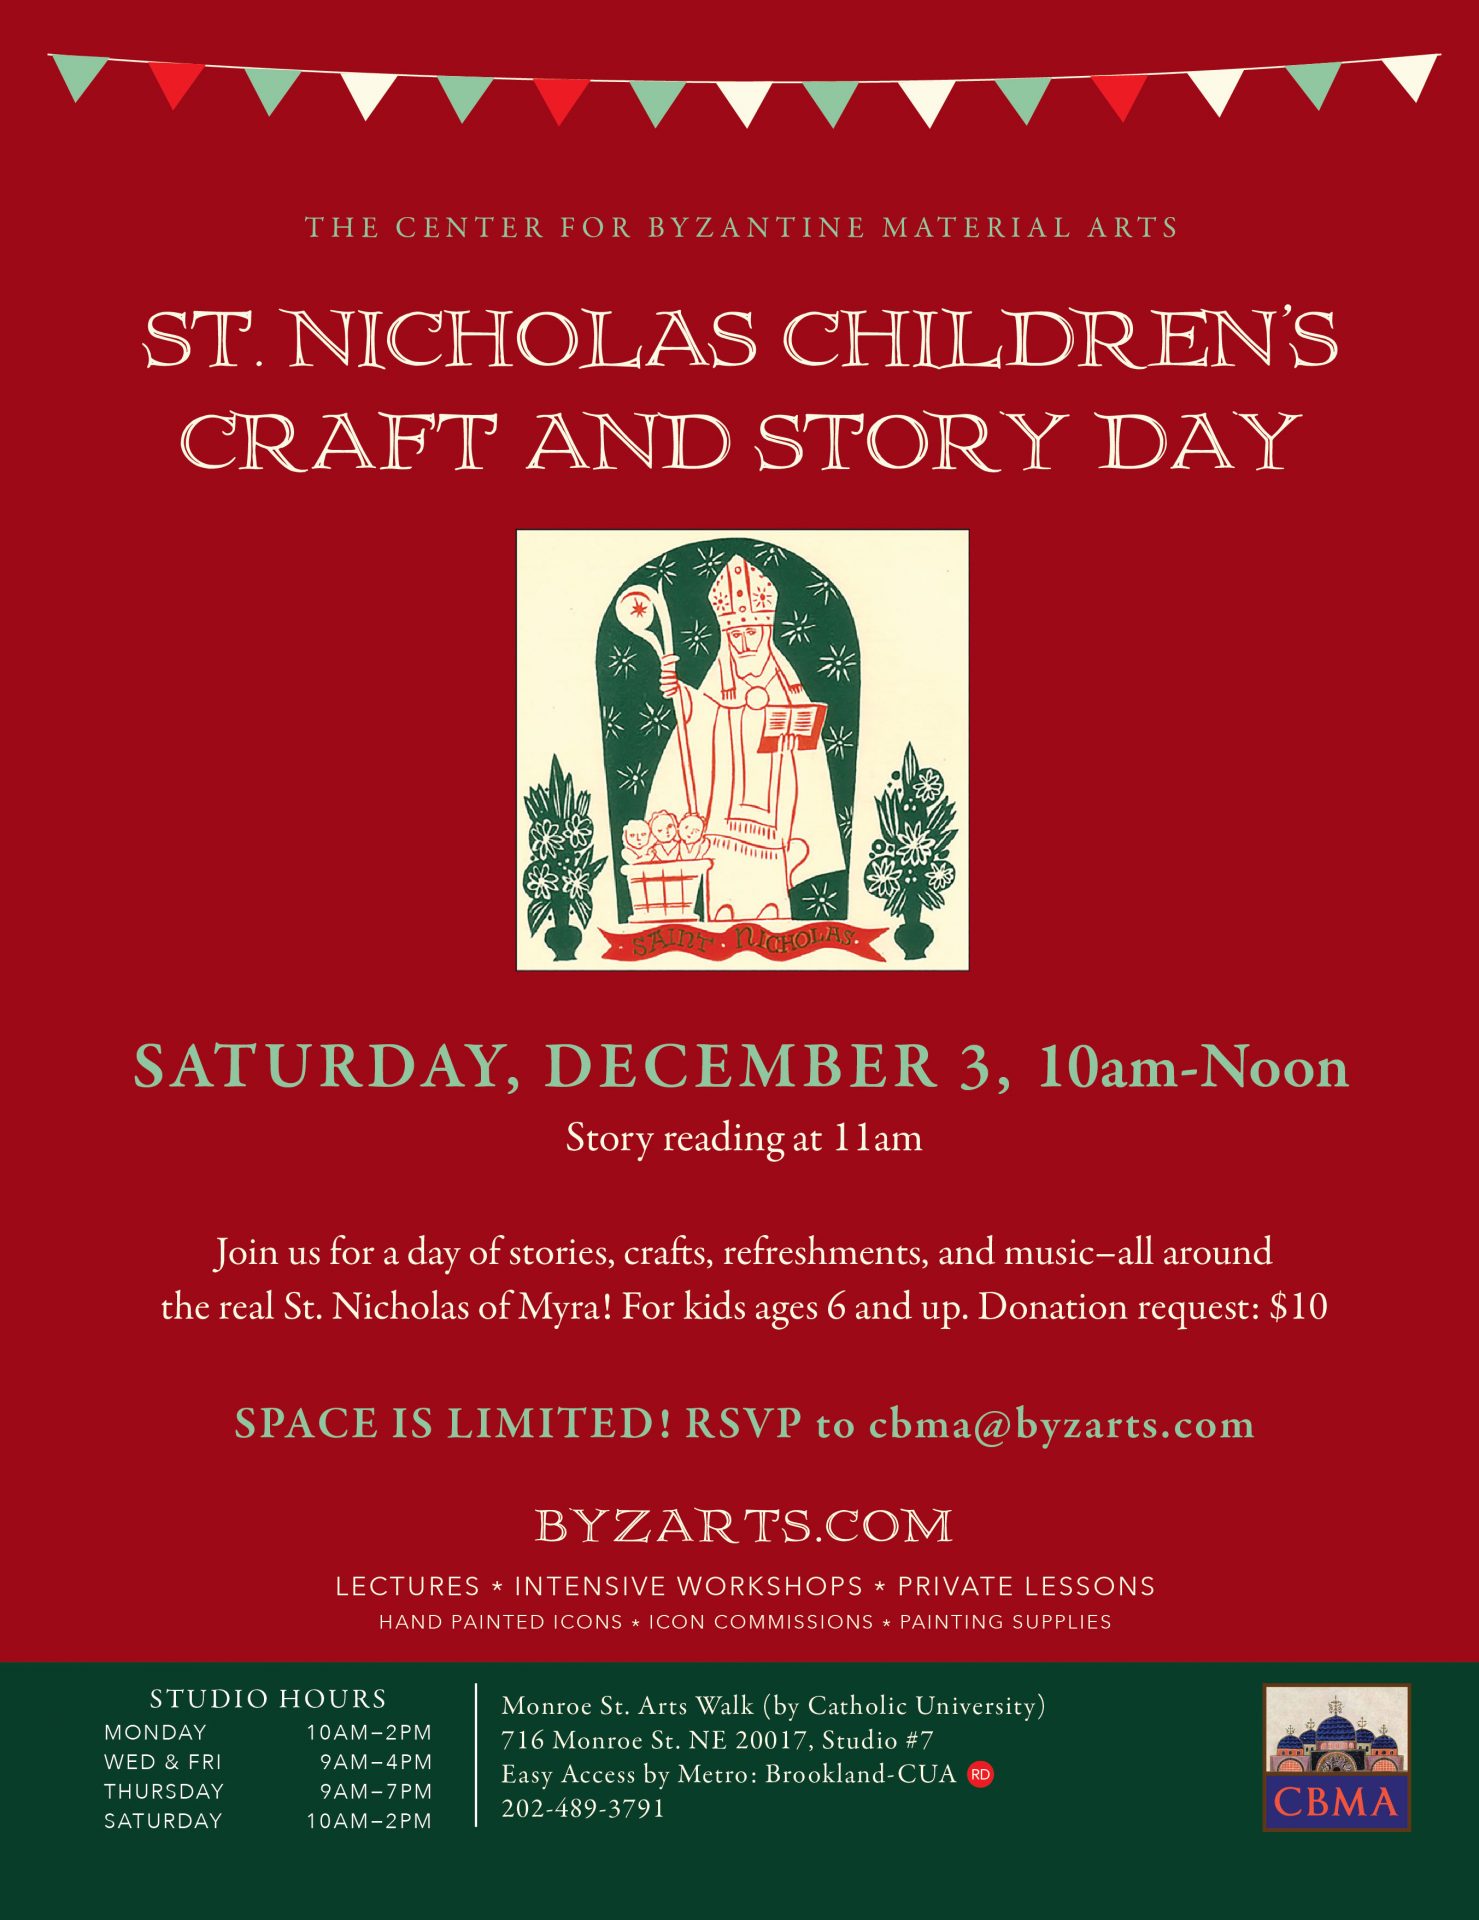 The Center for Byzantine Material Arts: St. Nicholas Children's Craft & Story Day